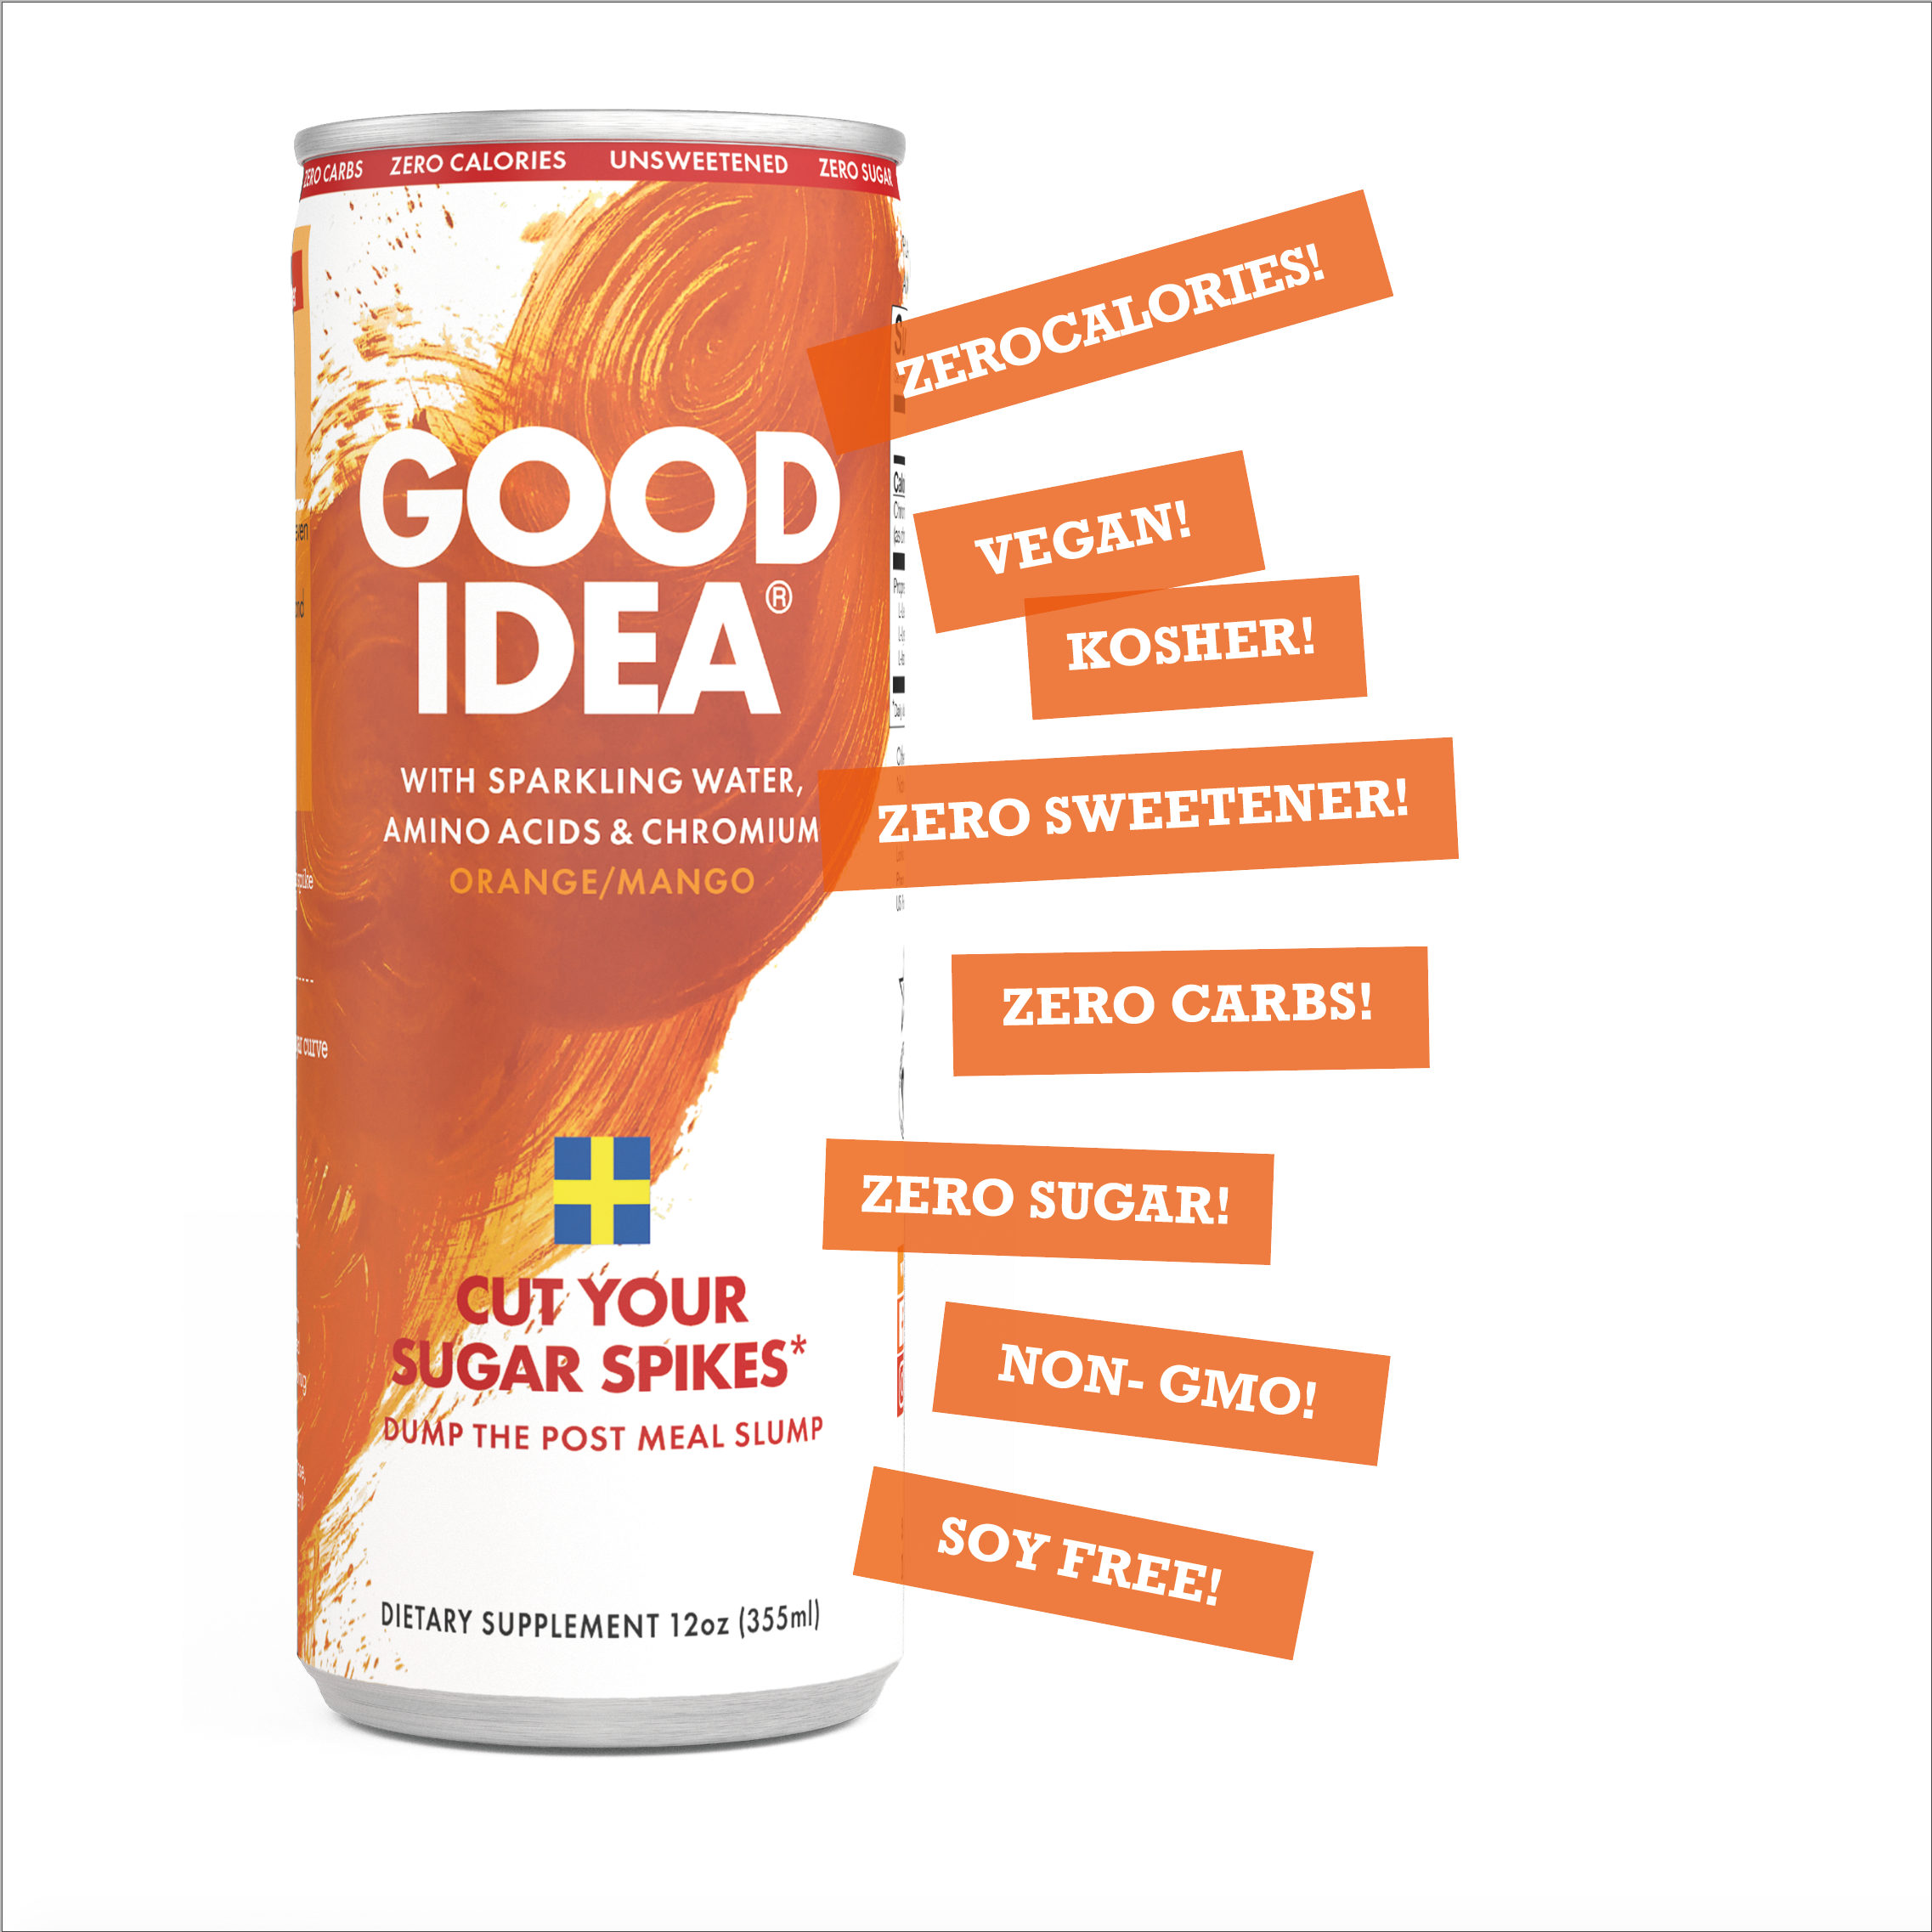 SOLD OUT! Cut your sugar spikes* - Good Idea® 12 Count Sparkling Orange Mango. Now with an Introductory Offer!